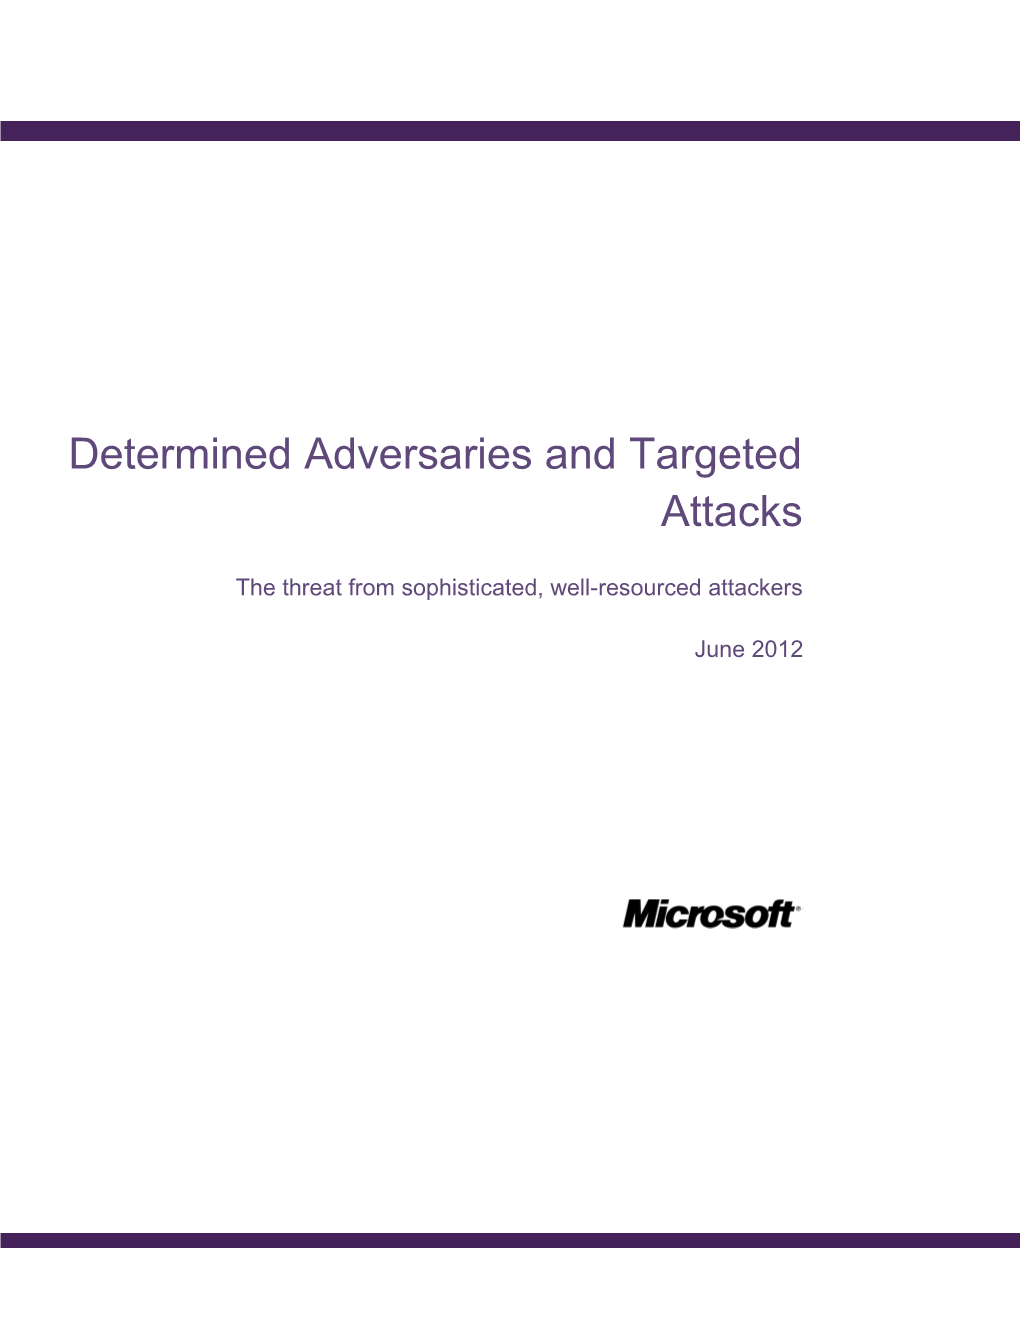 Determined Adversaries and Targeted Attacks